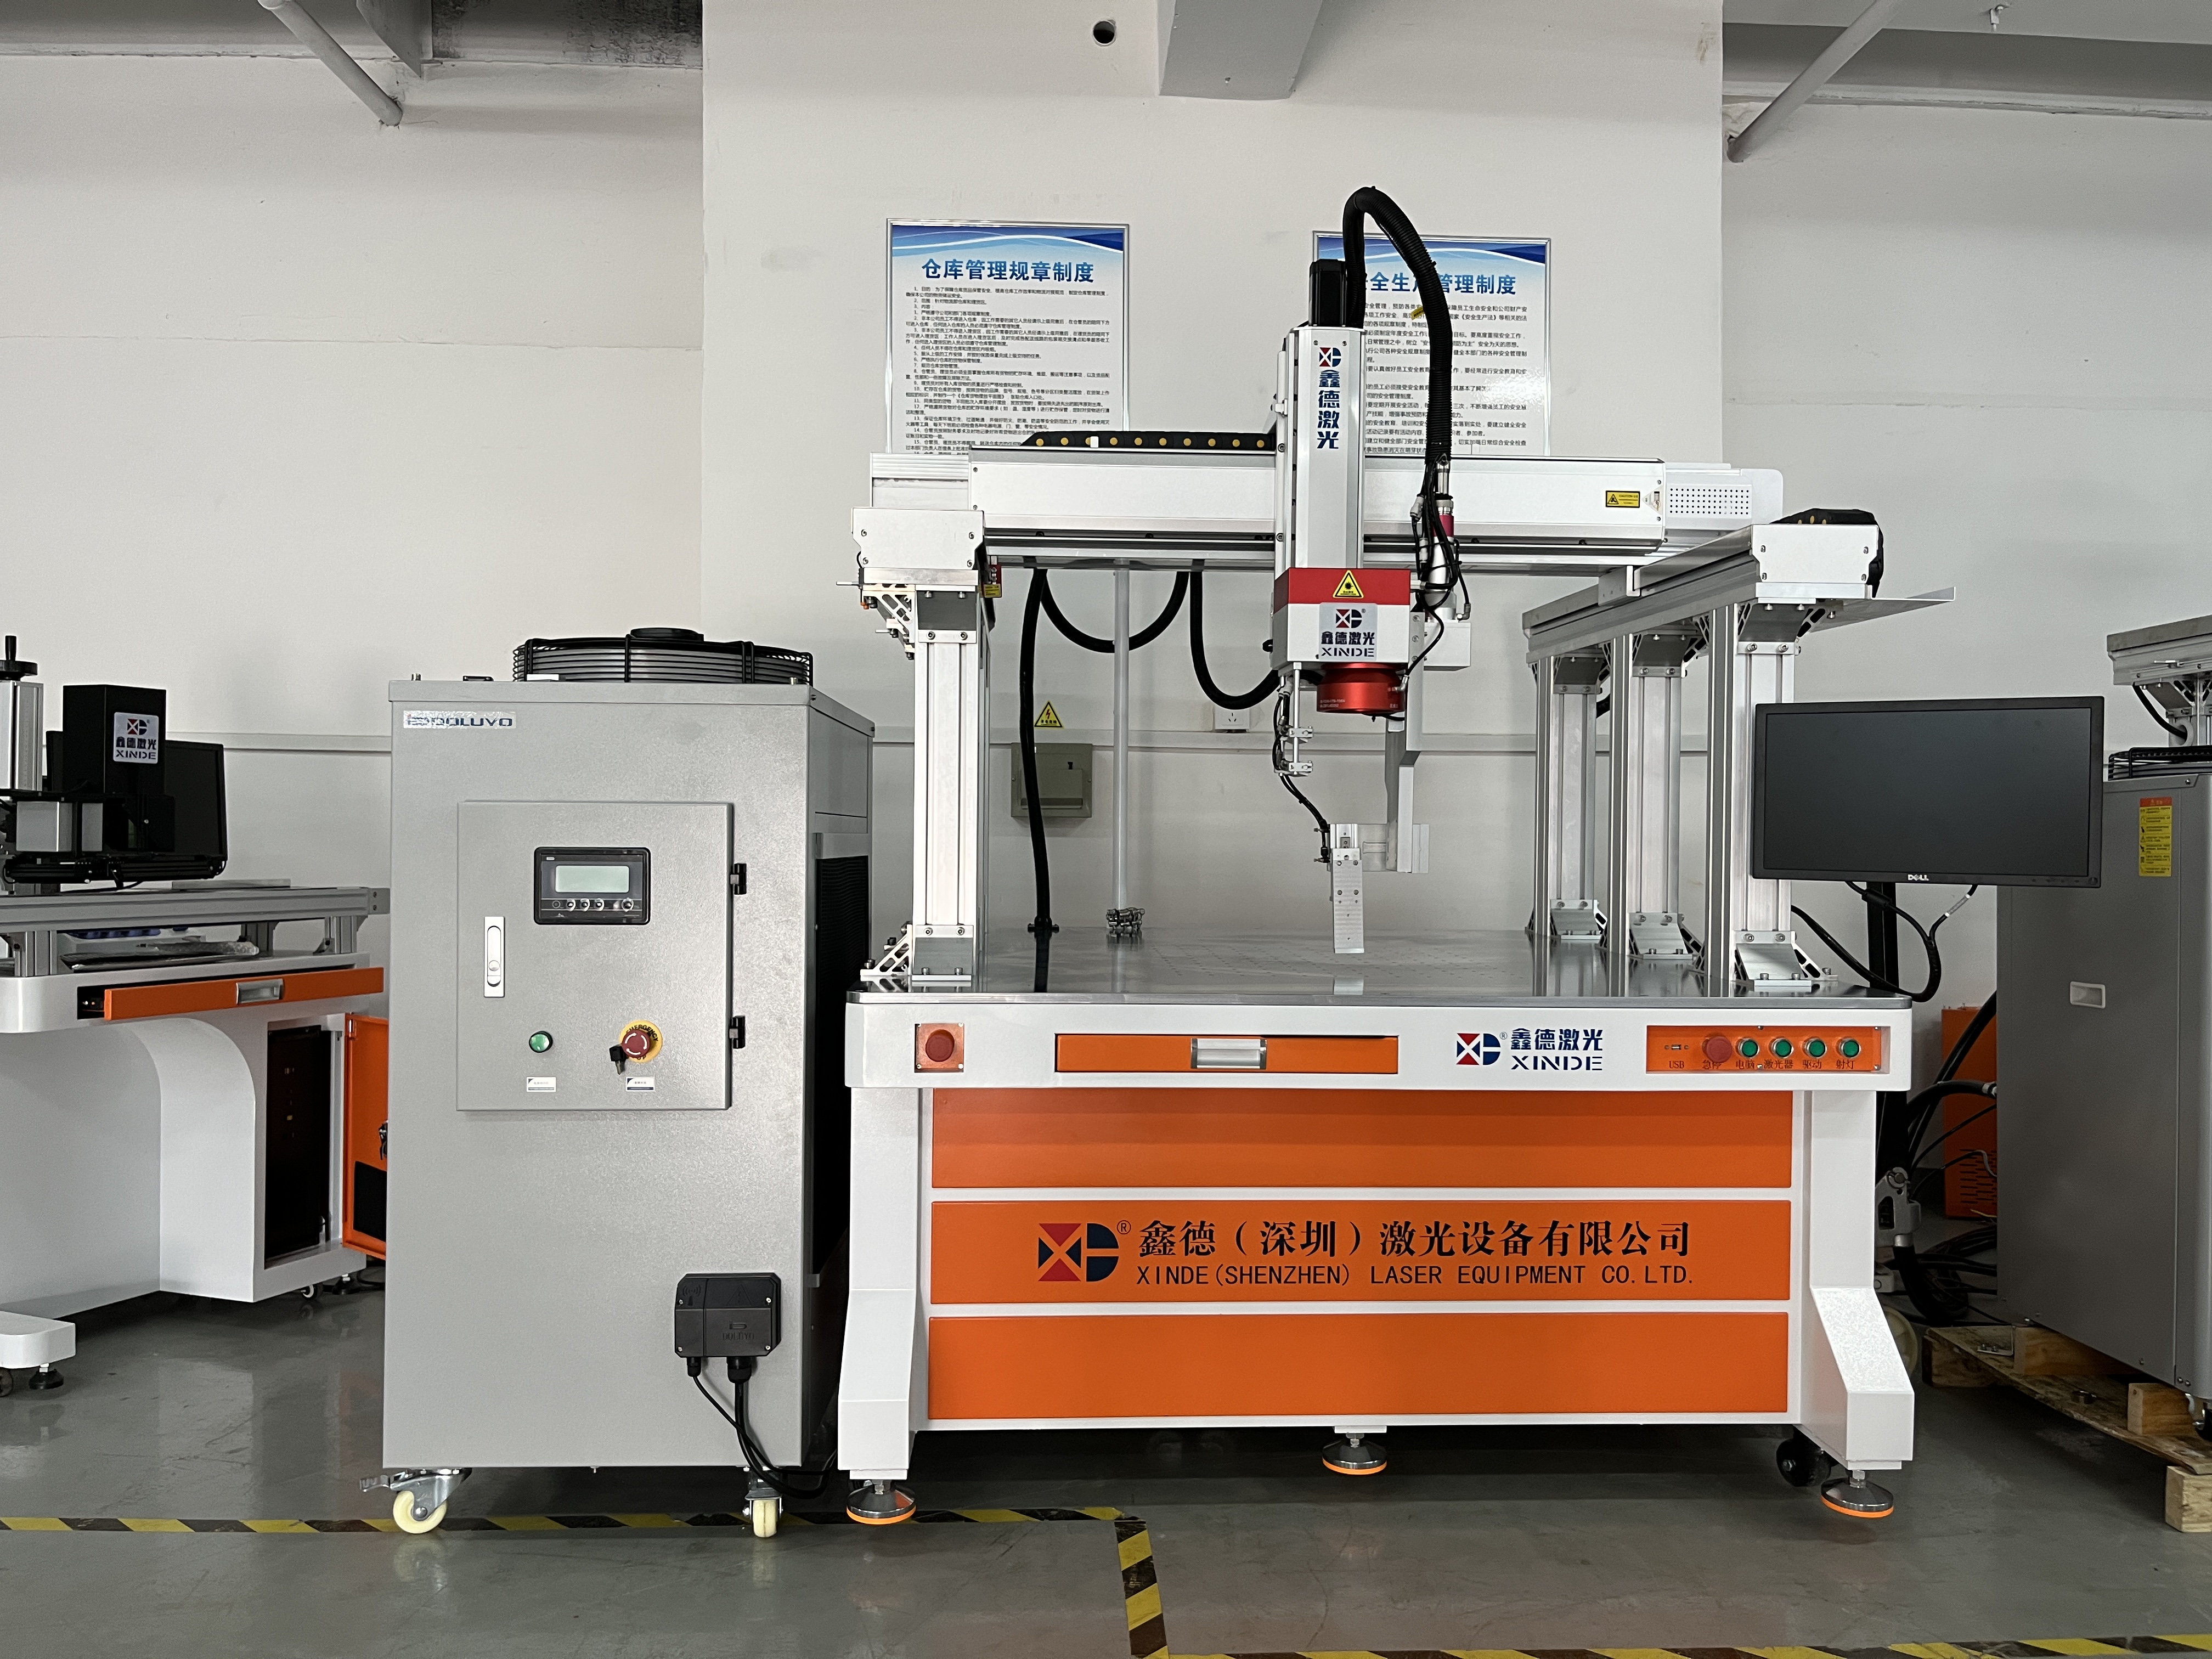 Why are laser welding equipment manufacturers favored by many battery manufacturers?